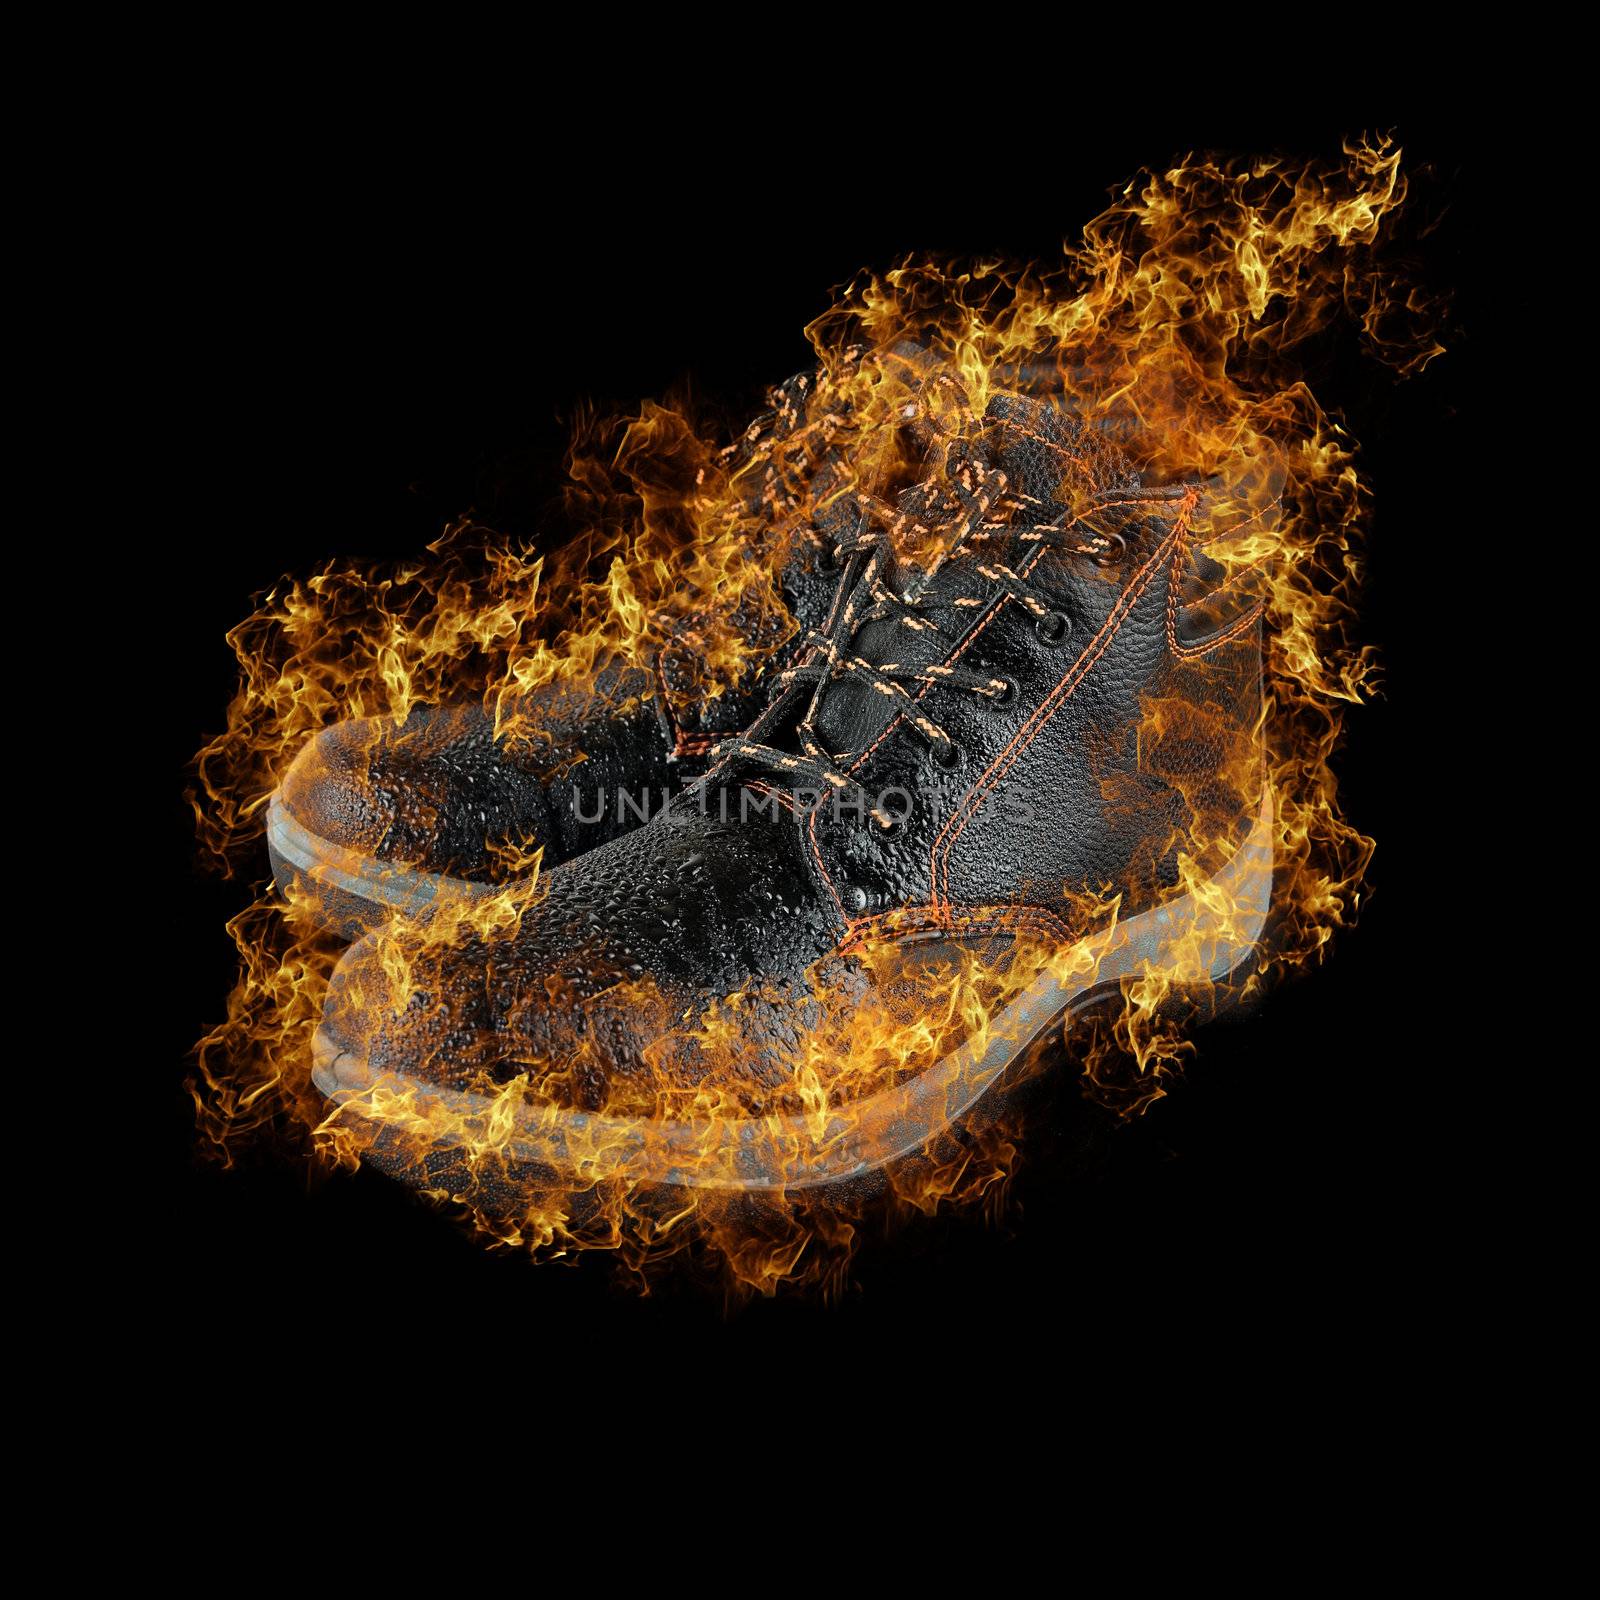 moist modern working boots at fire isolated on a black background